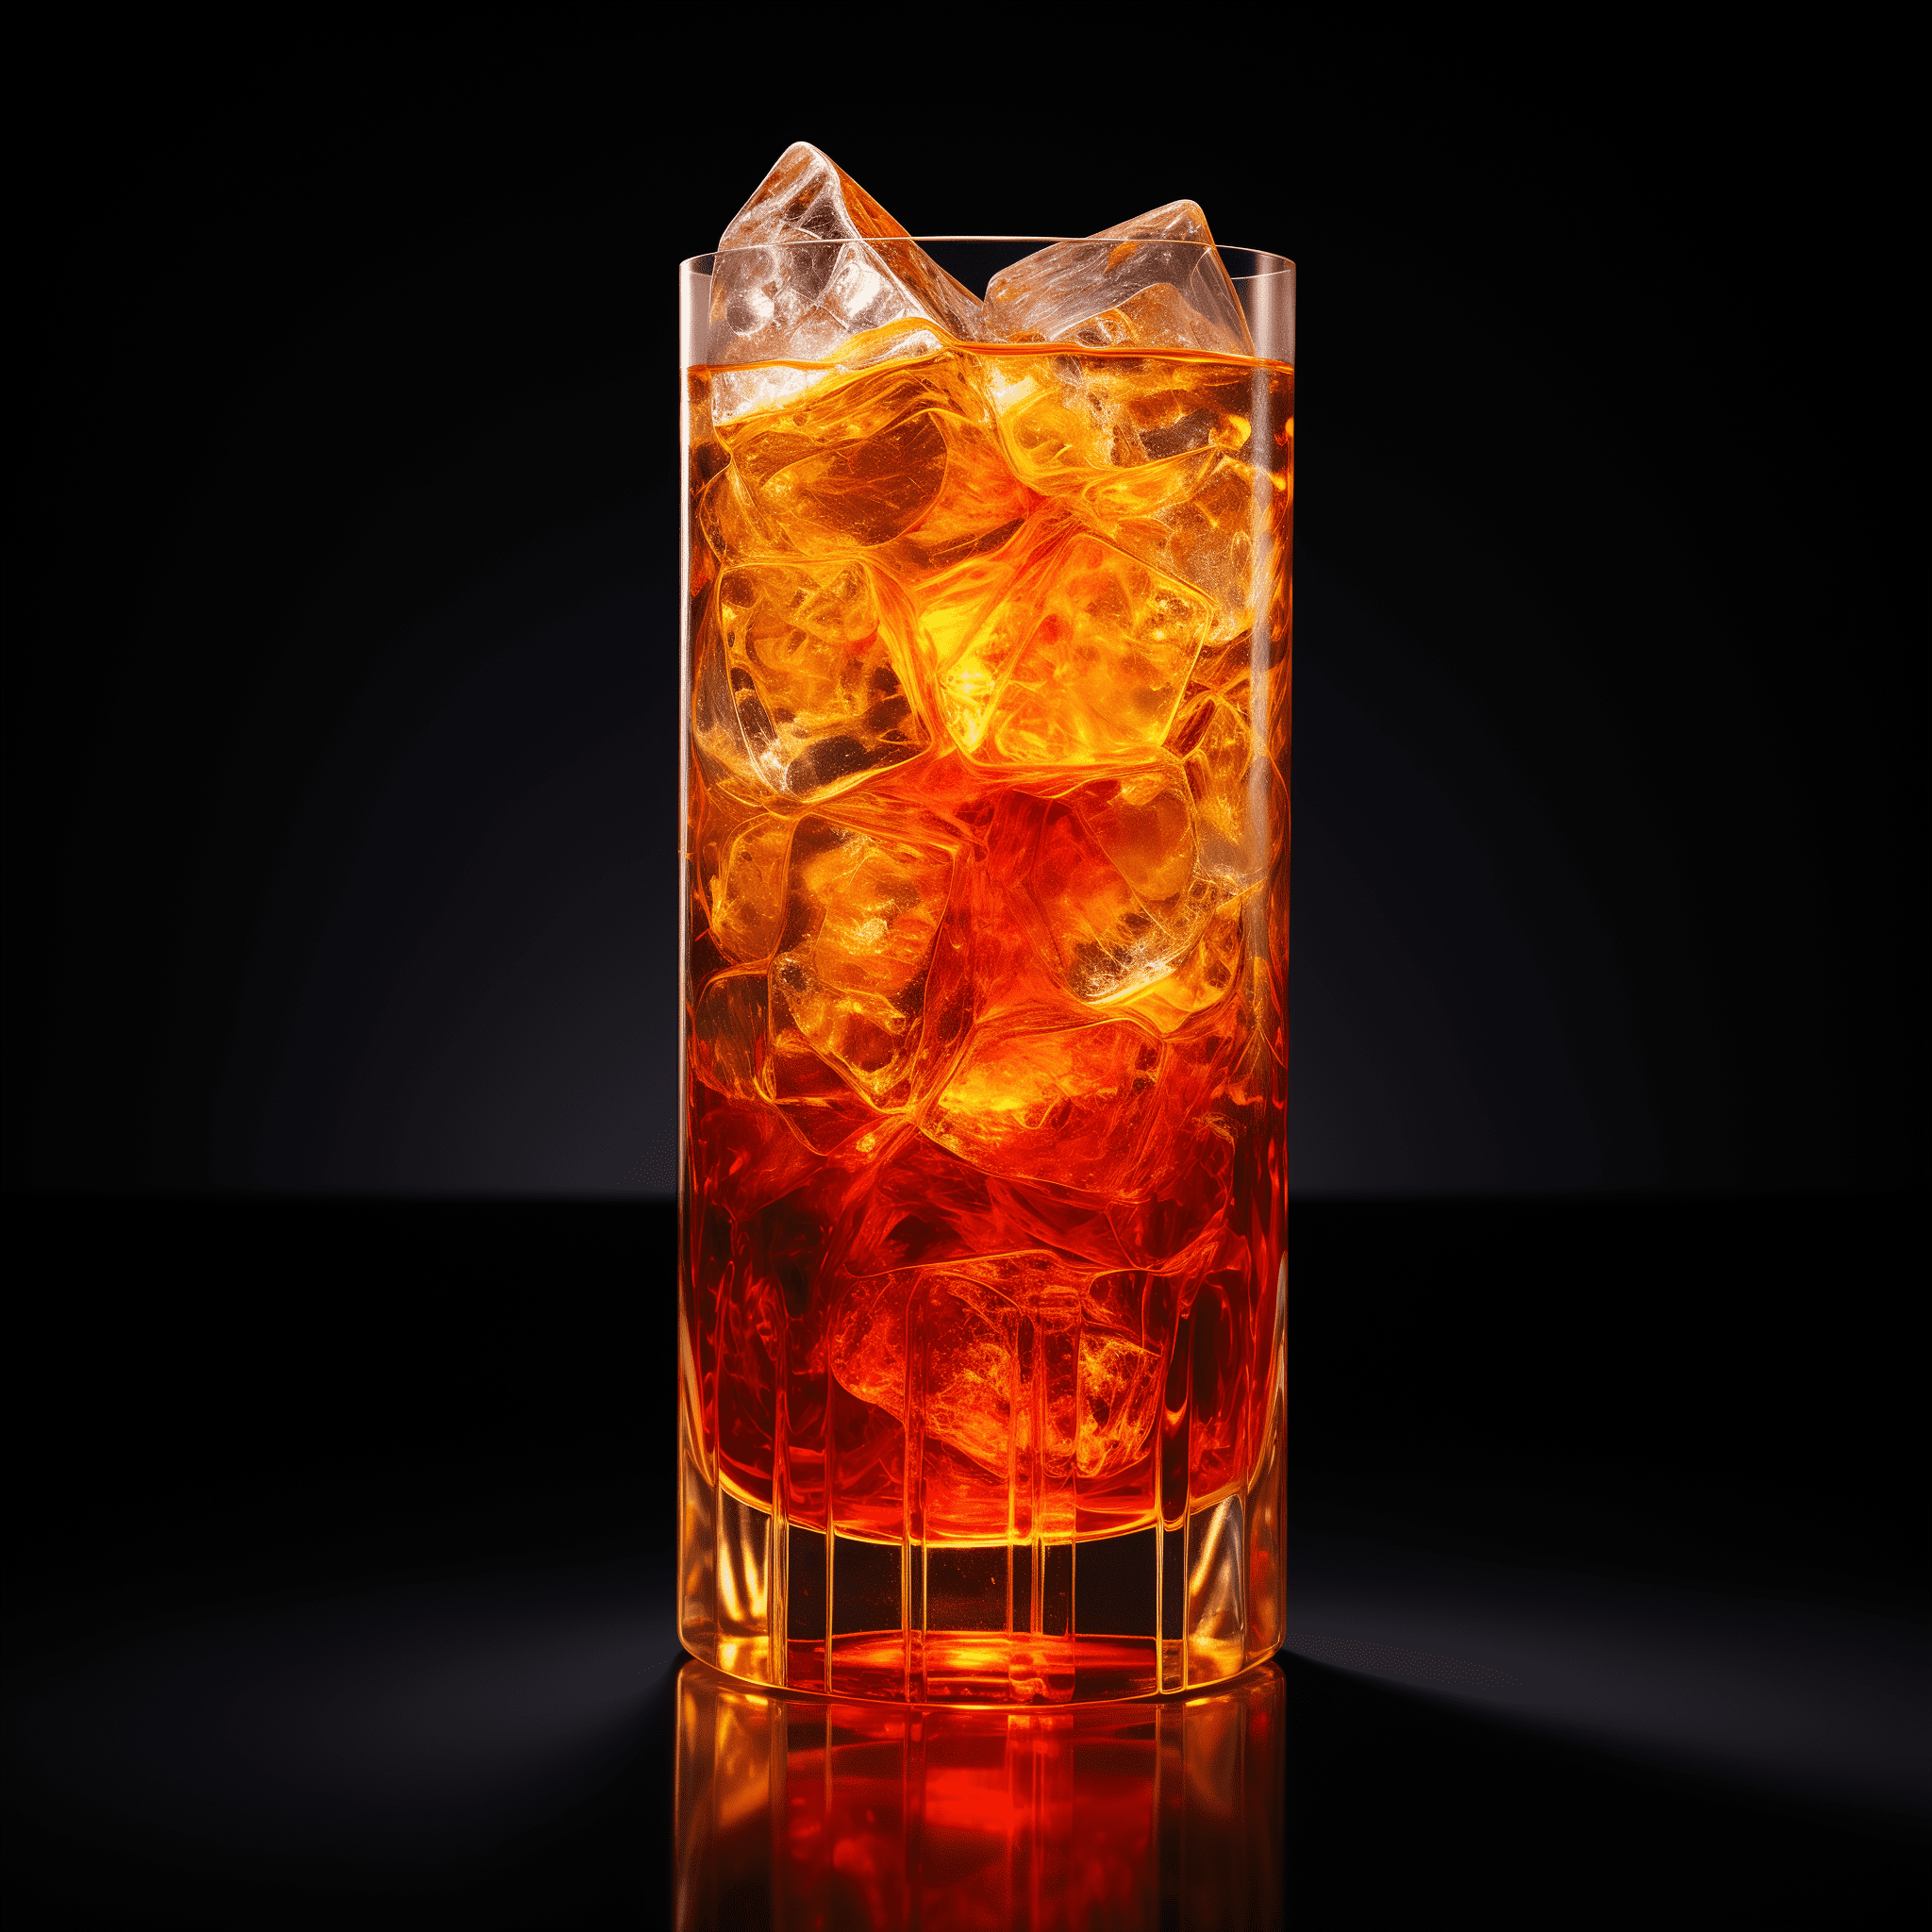 Bull Blaster Cocktail Recipe - The Bull Blaster is a bold cocktail with a sweet, syrupy base from the Jagermeister, complemented by the carbonated, citrusy zing of Red Bull. It's a strong, invigorating drink with a unique herbal aftertaste.